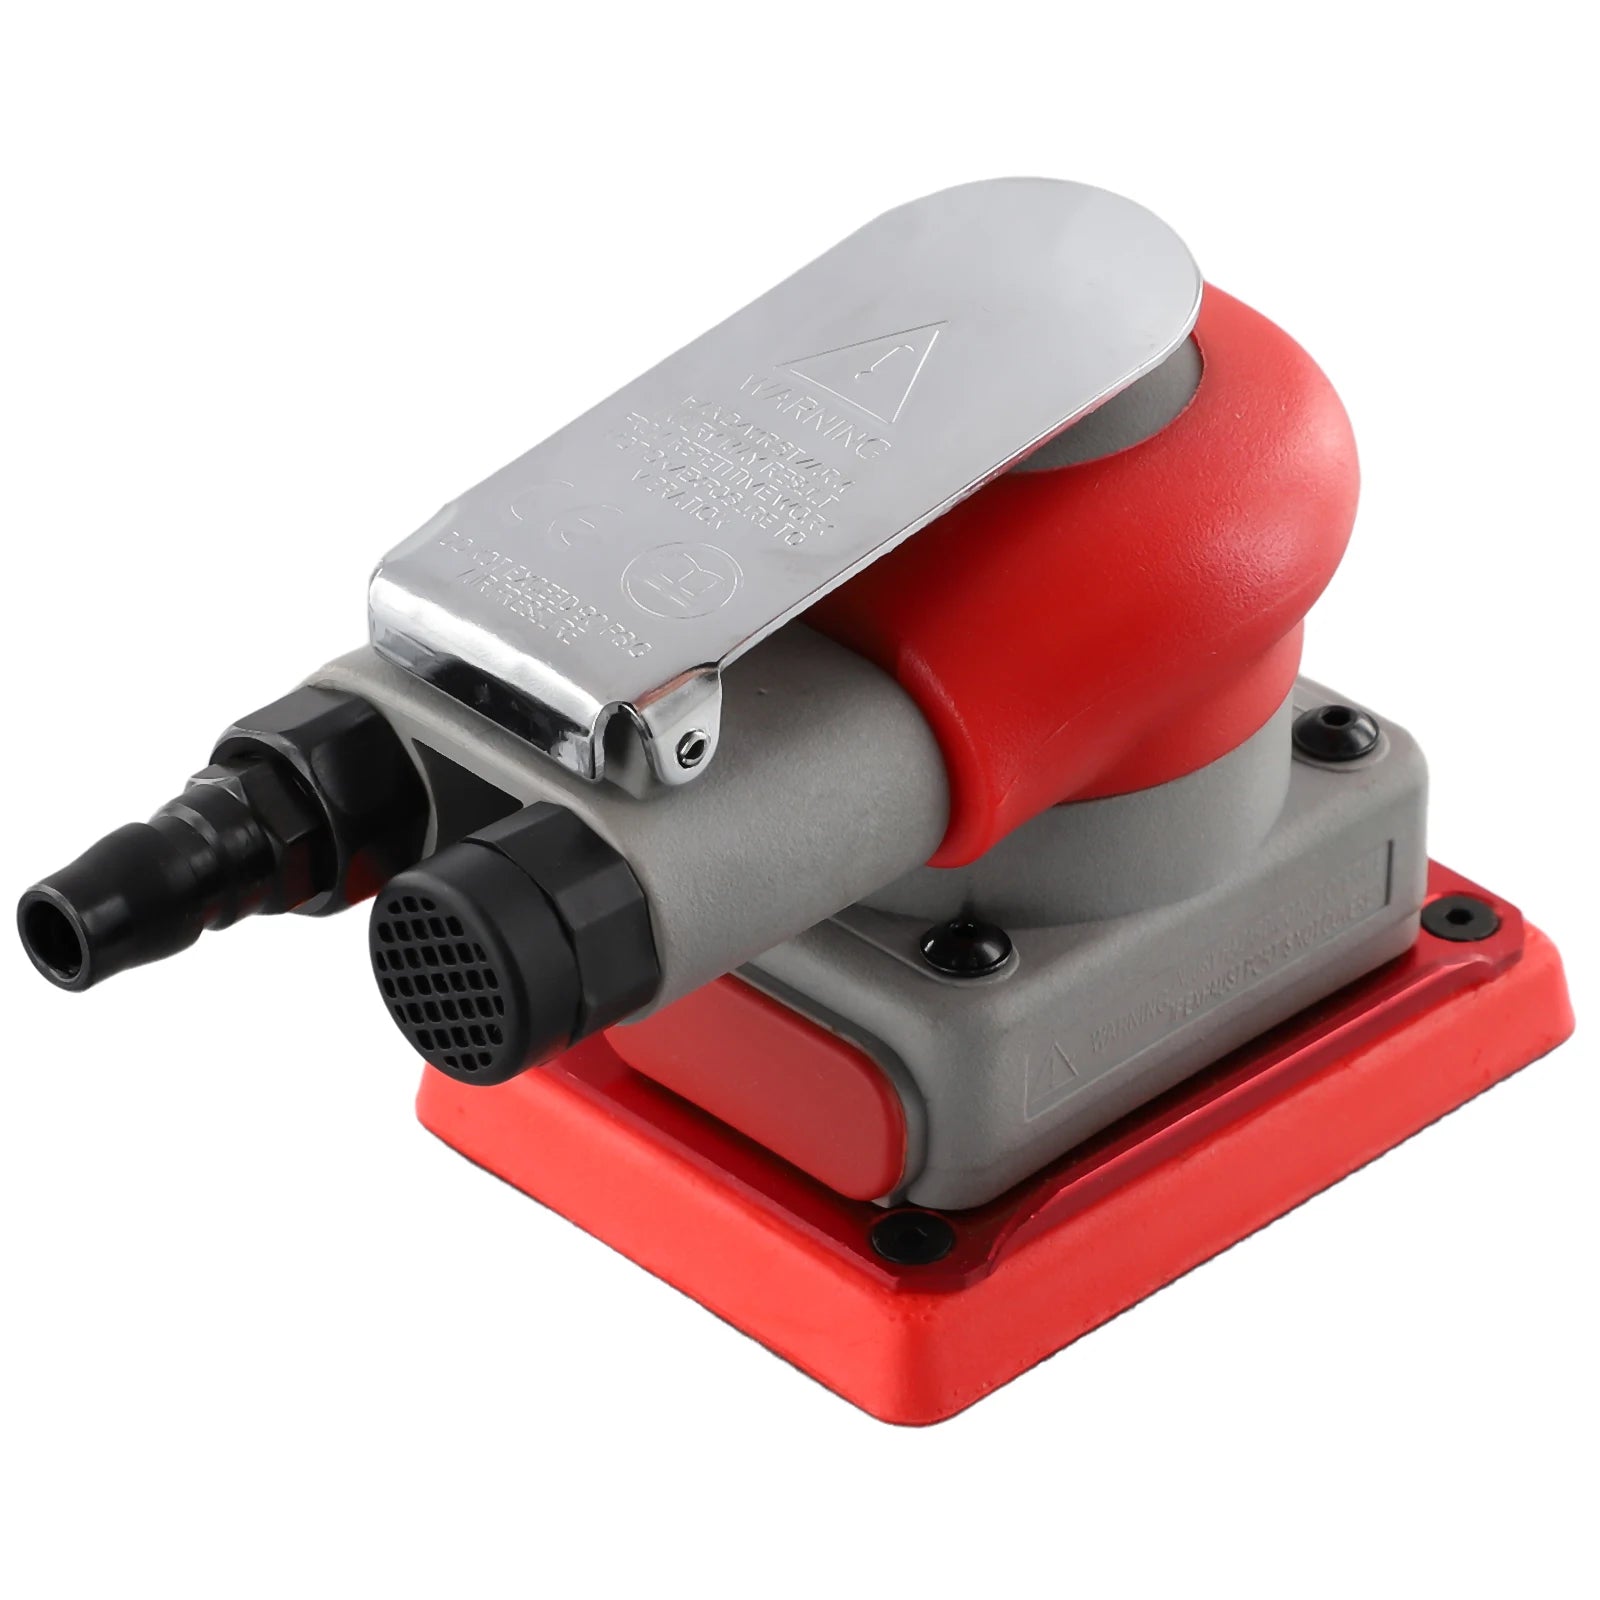 Pneumatic Grinder 10000 Rpm Square Air Sander For Wood Grinding Car Waxing Metal Rust Removal Tools 75 X 100 Mm 3.00 X 4.00 Inch